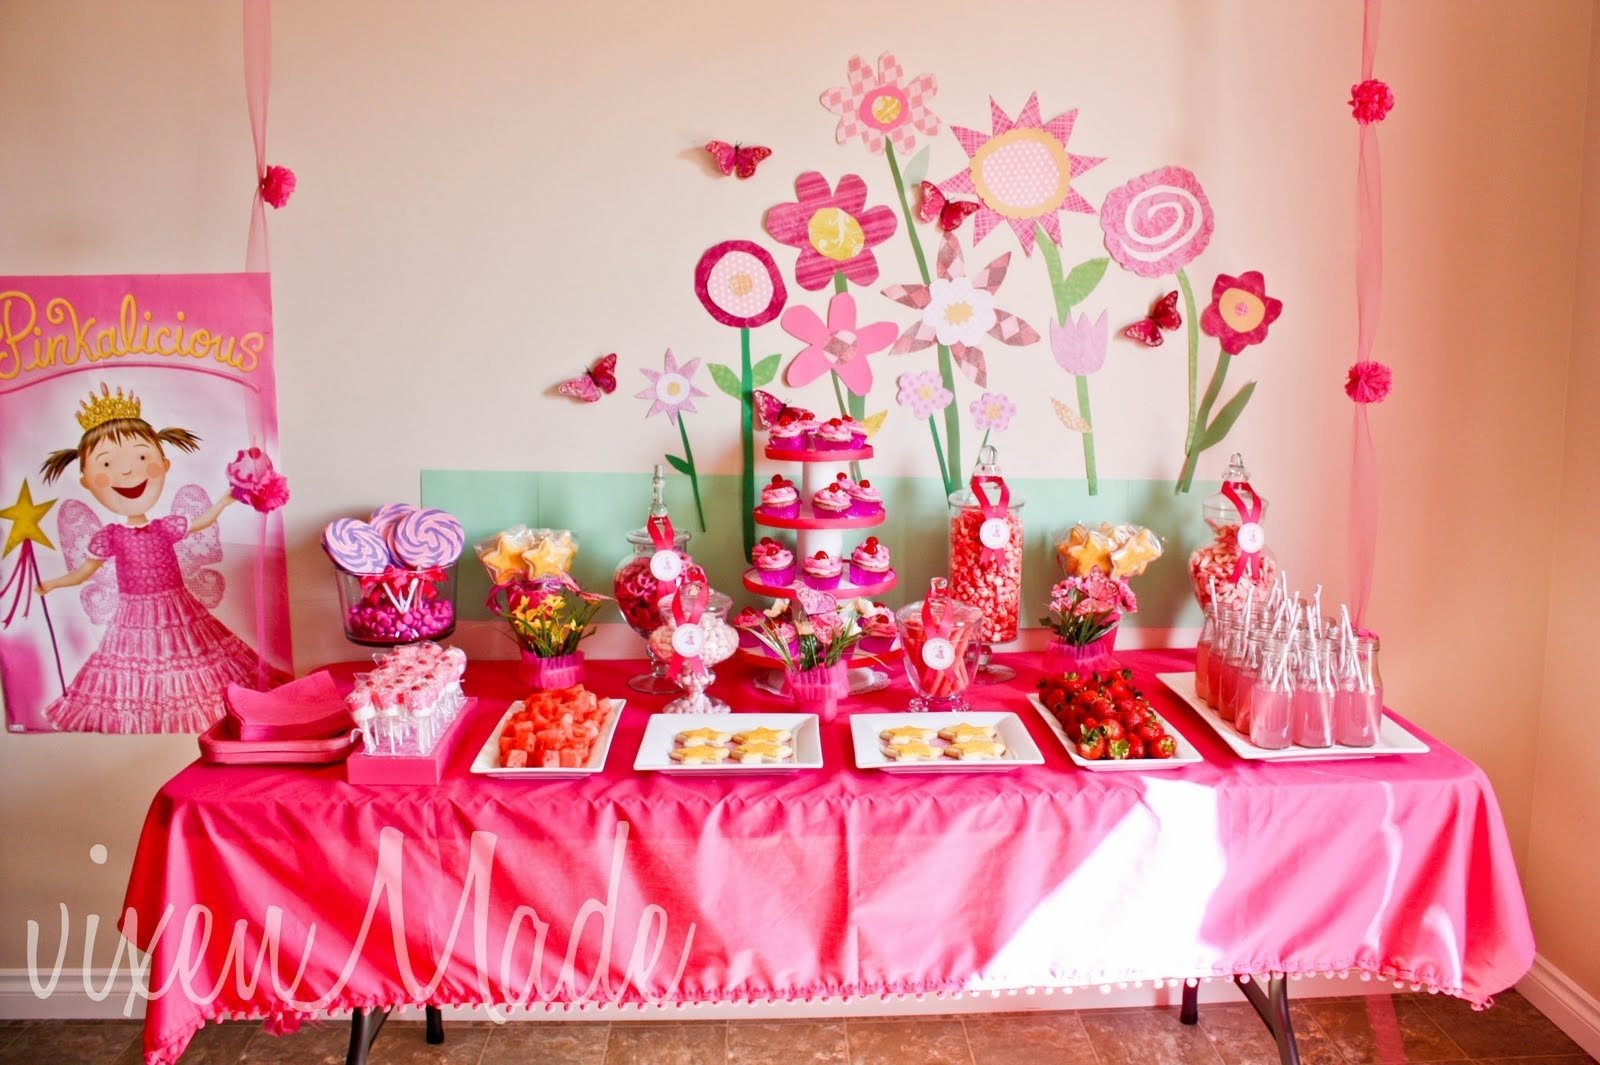 10 Perfect Birthday Party Ideas For Teens 50 birthday party themes for girls i heart nap time 33 2022